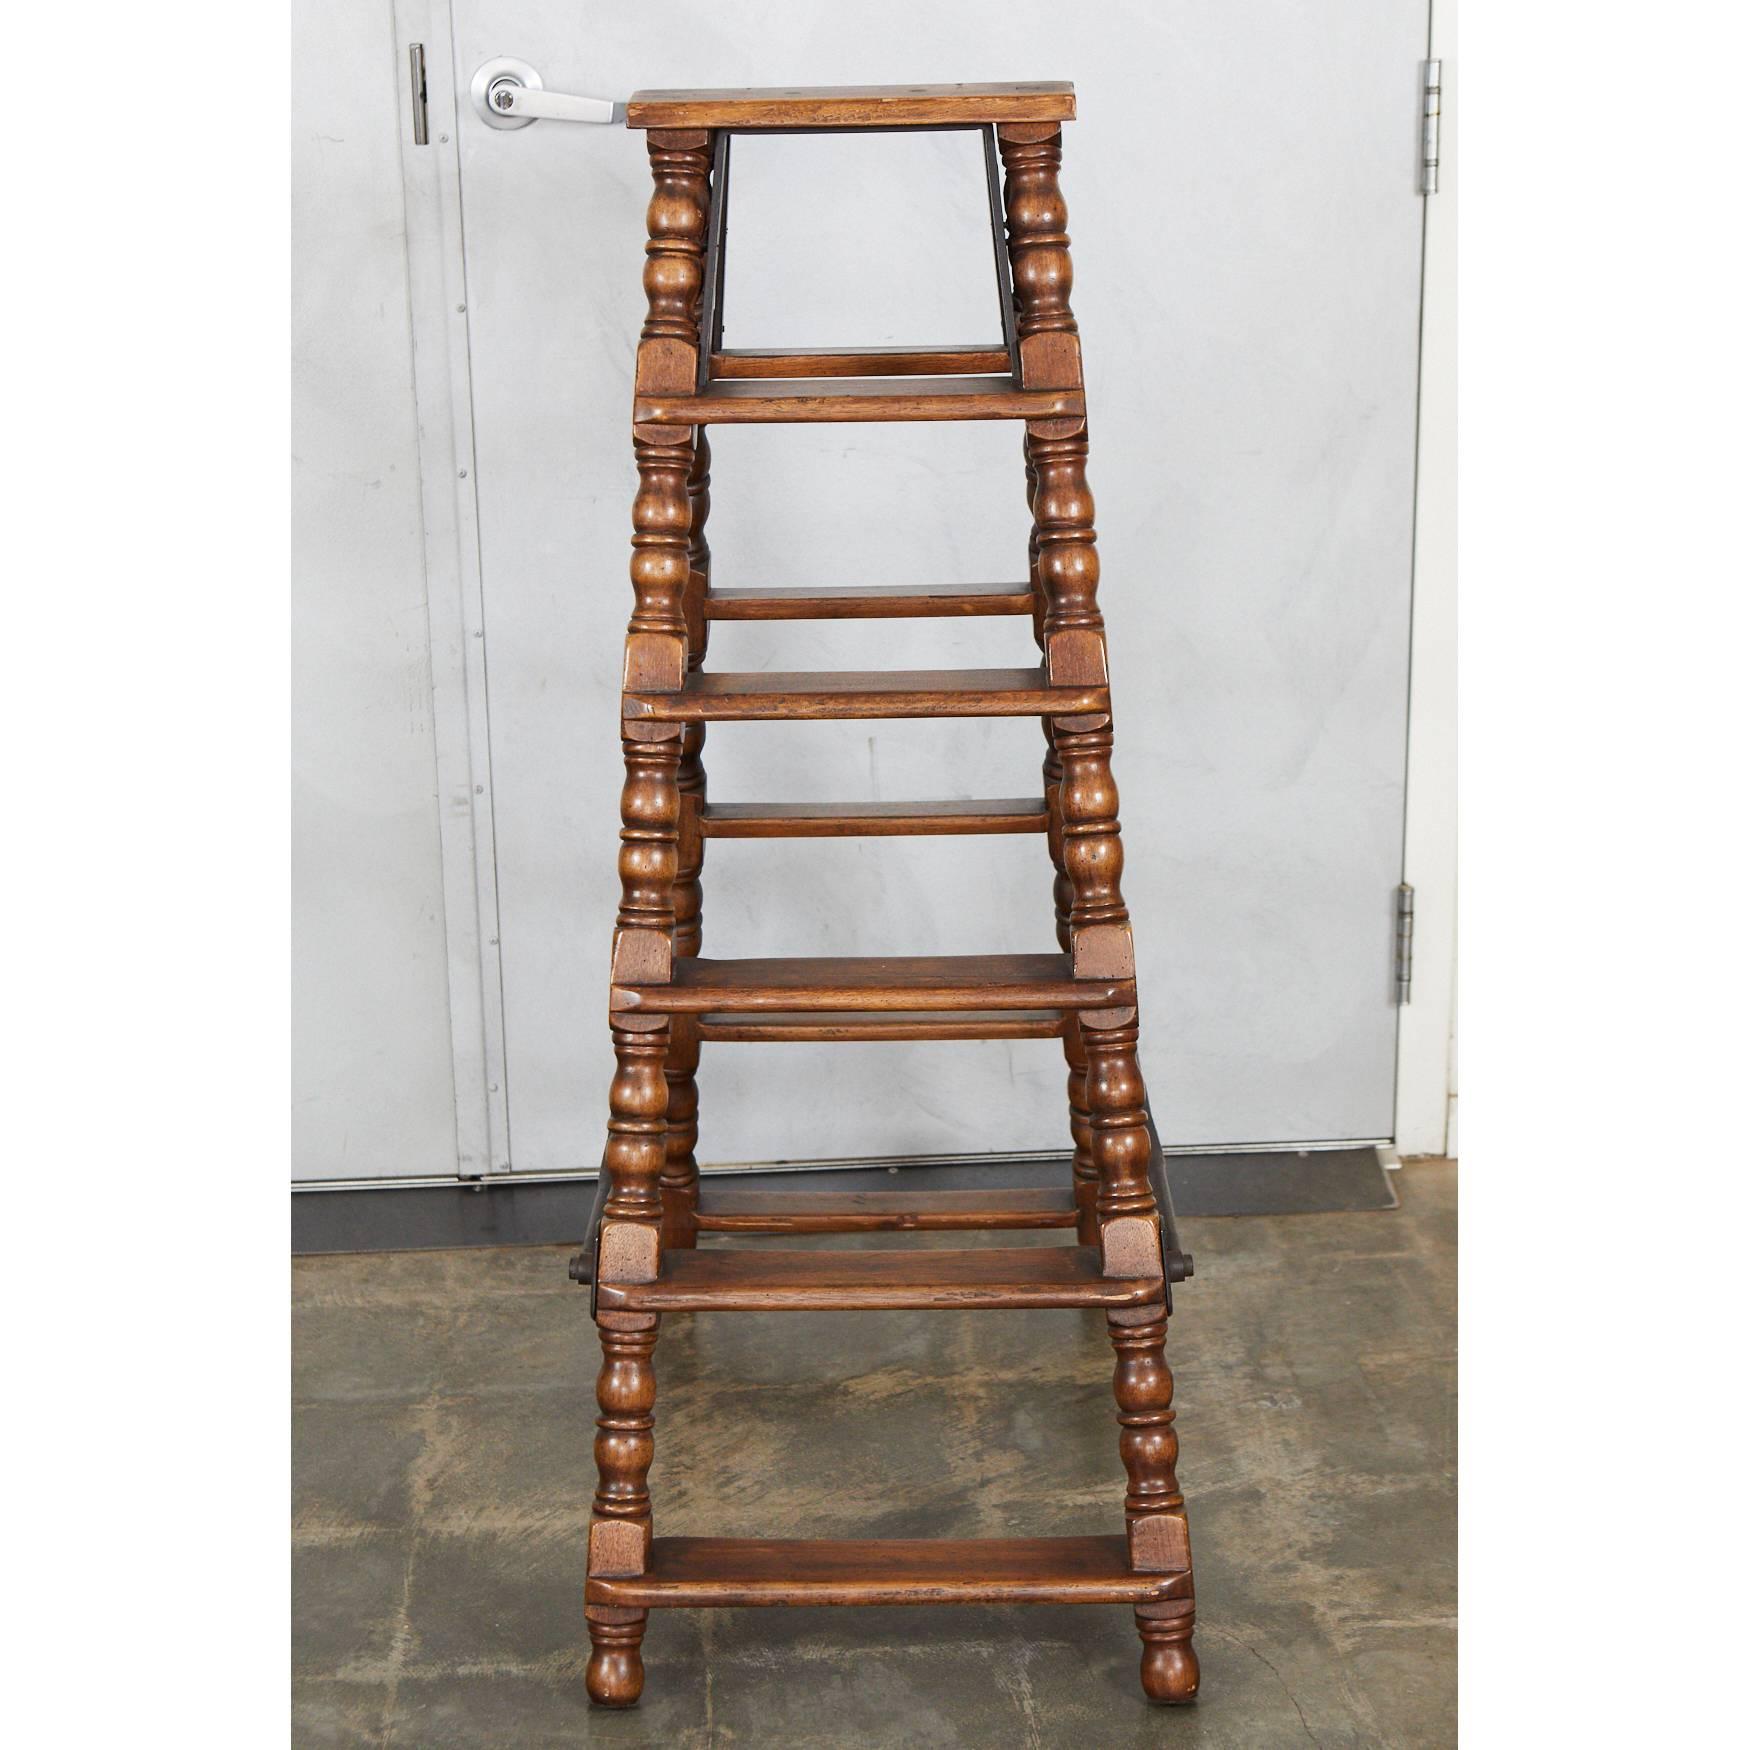 We believe this ladder was made 1950s in the Jacobean style with nicely turned elements. The ladder has solid construction and an elegant design. The iron hinges are very well made and add to the great look of the piece.

      